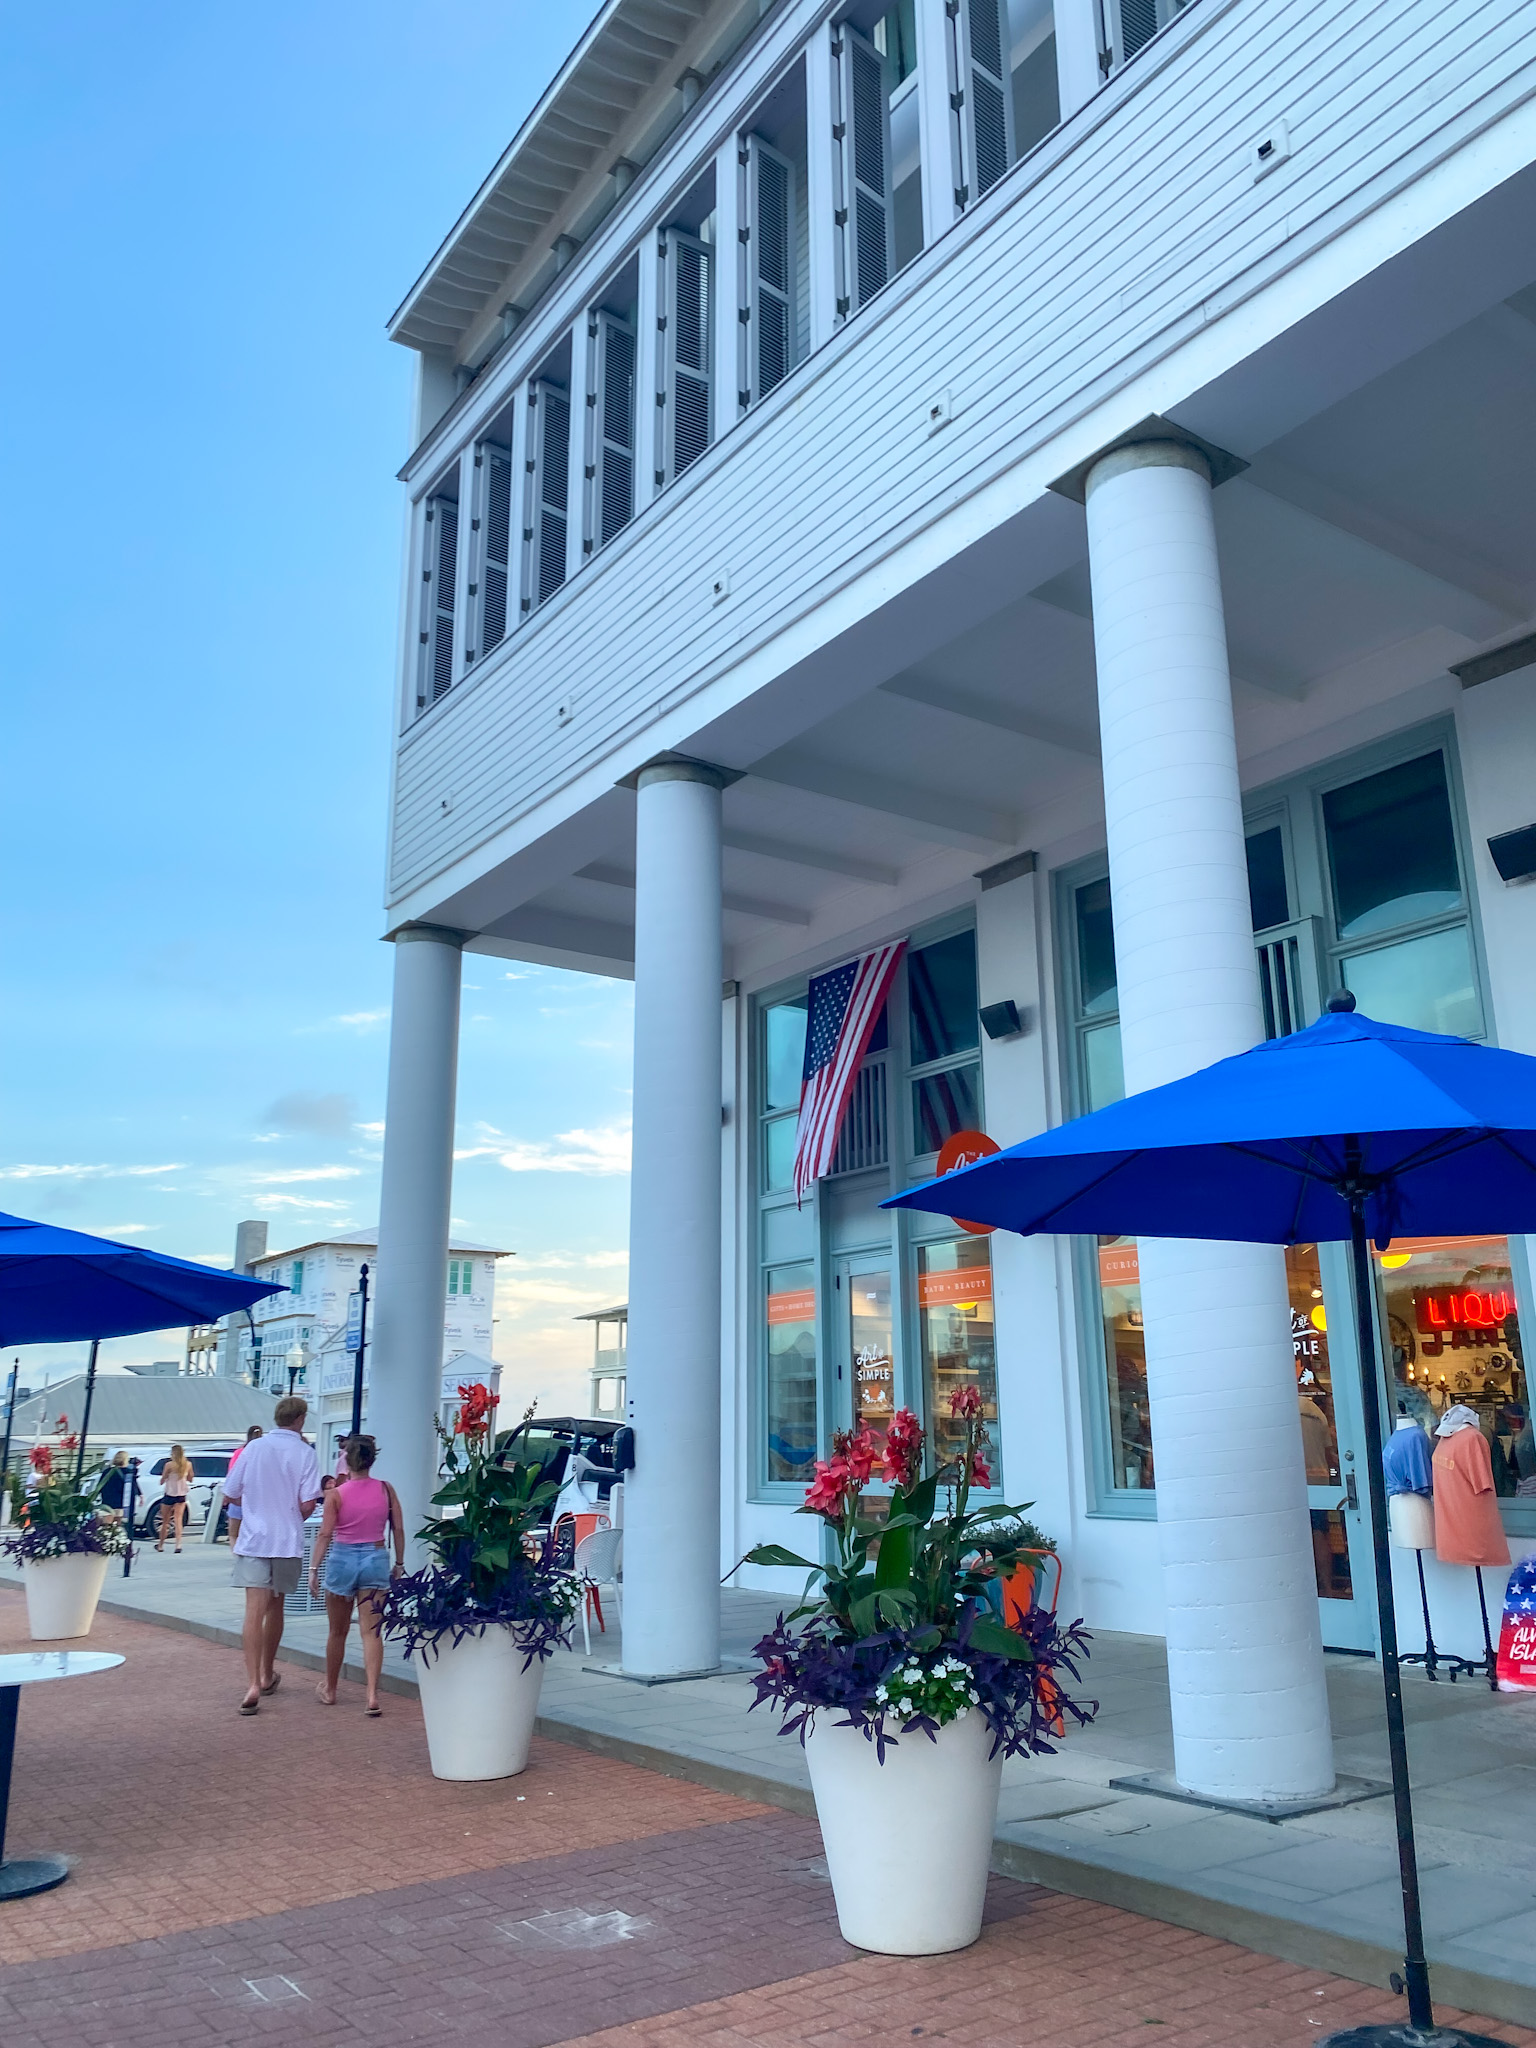 10 Best Things to Do in Seaside, Florida The Detailed Local